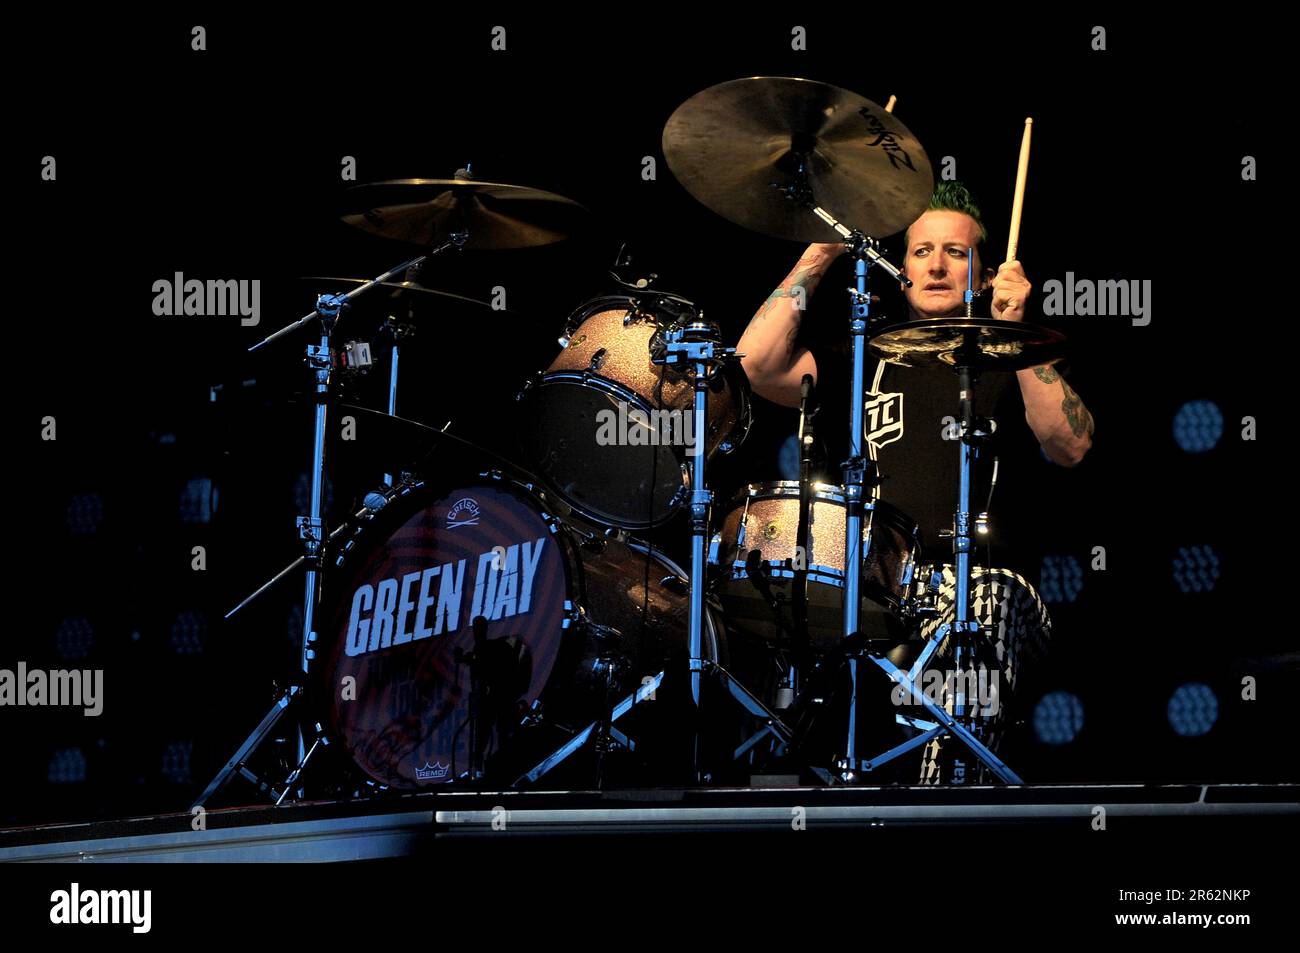 Milan Italy 2013-05-24:  Tré Cool drummer of Green Day during live concert at the Arena Fiera Rho Stock Photo